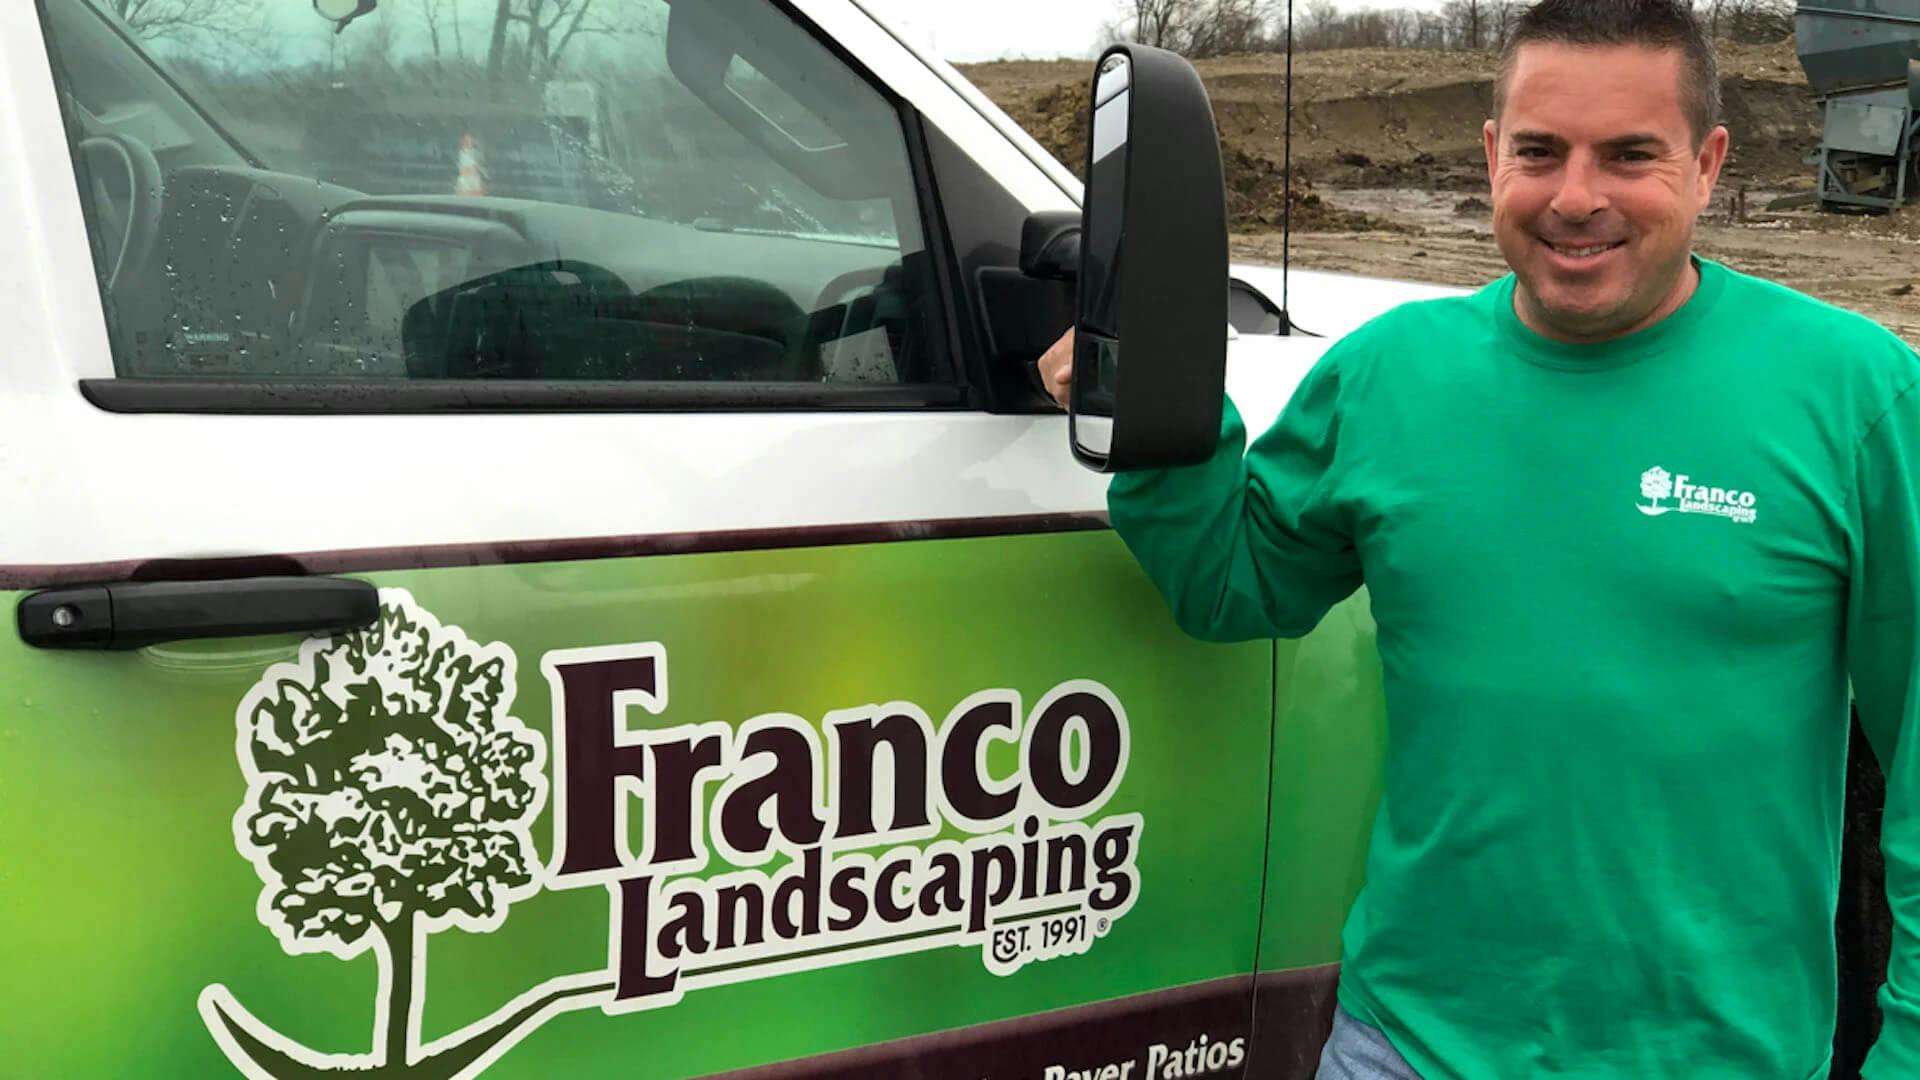 Man smiling next to a truck that is branded Franco Landscaping